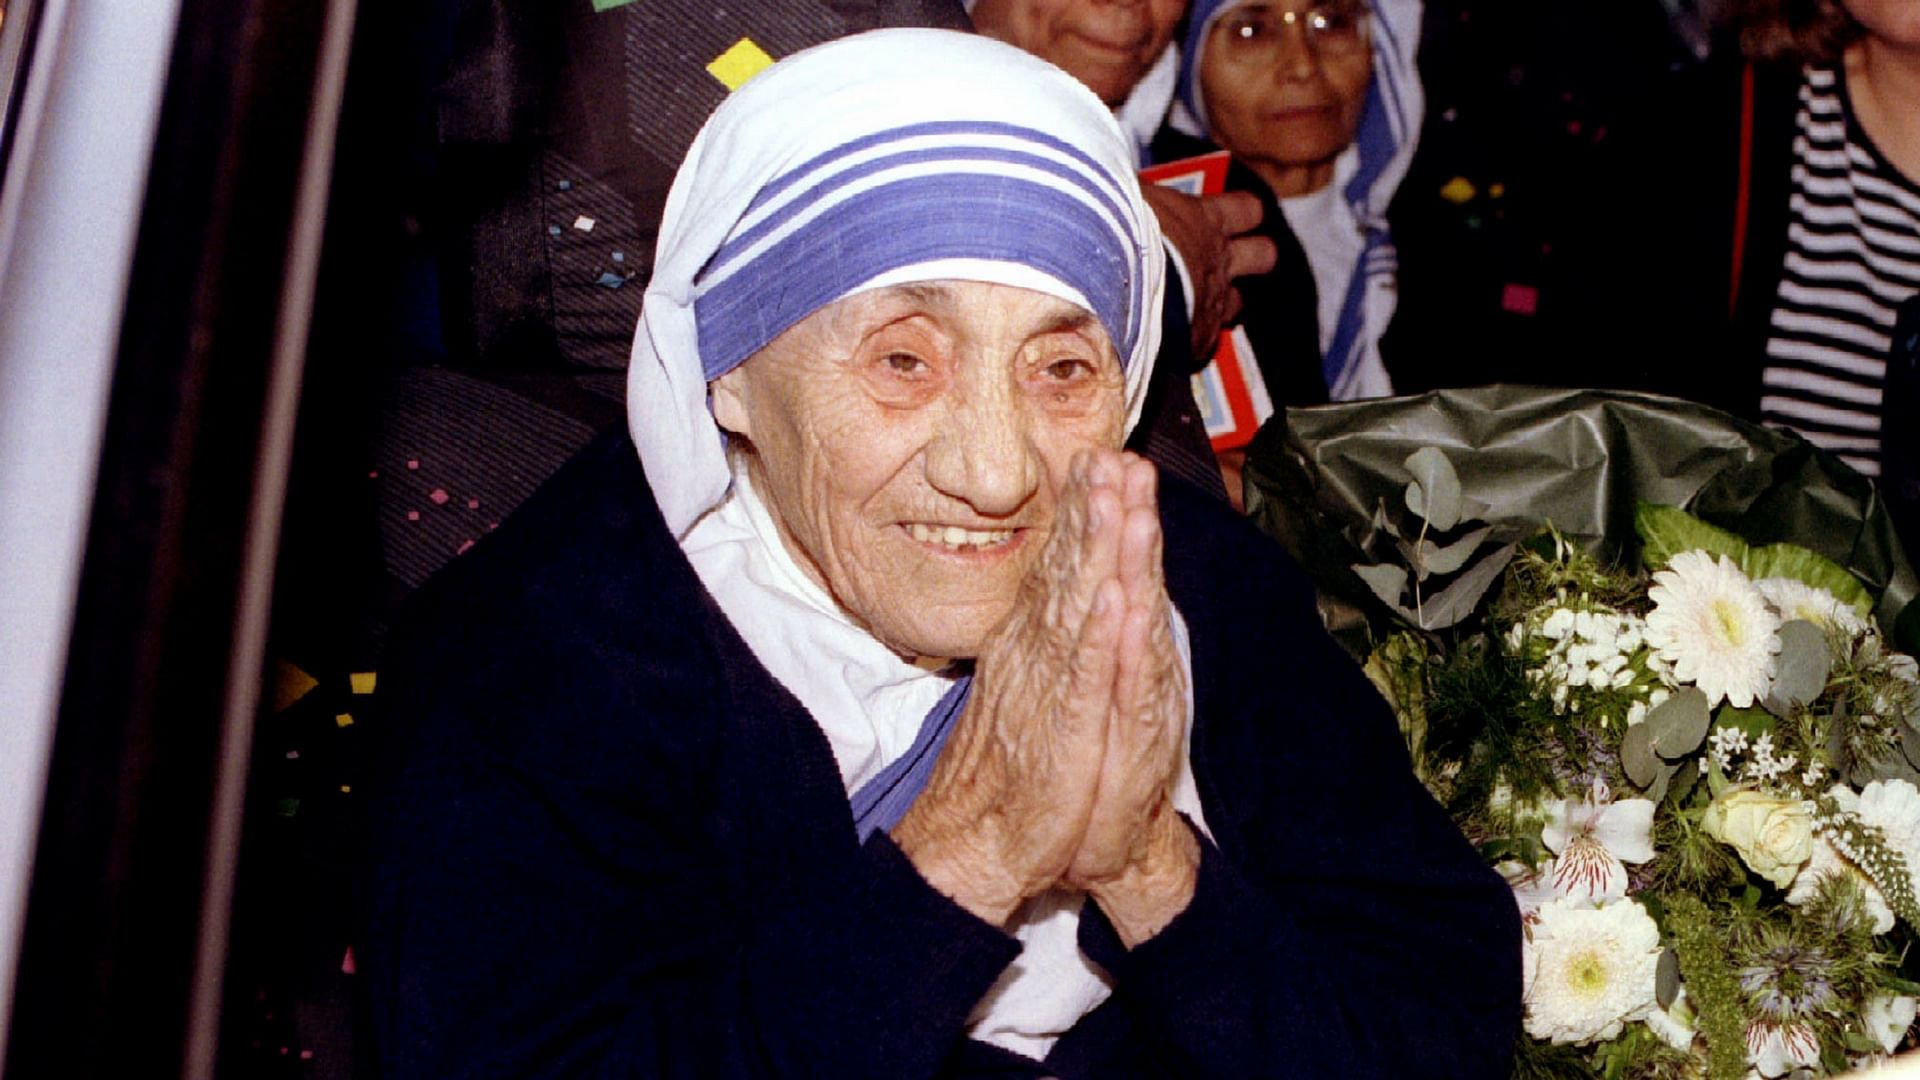 In 1997, Mother Teresa died of heart failure at the age of 87. (Photo: Reuters)